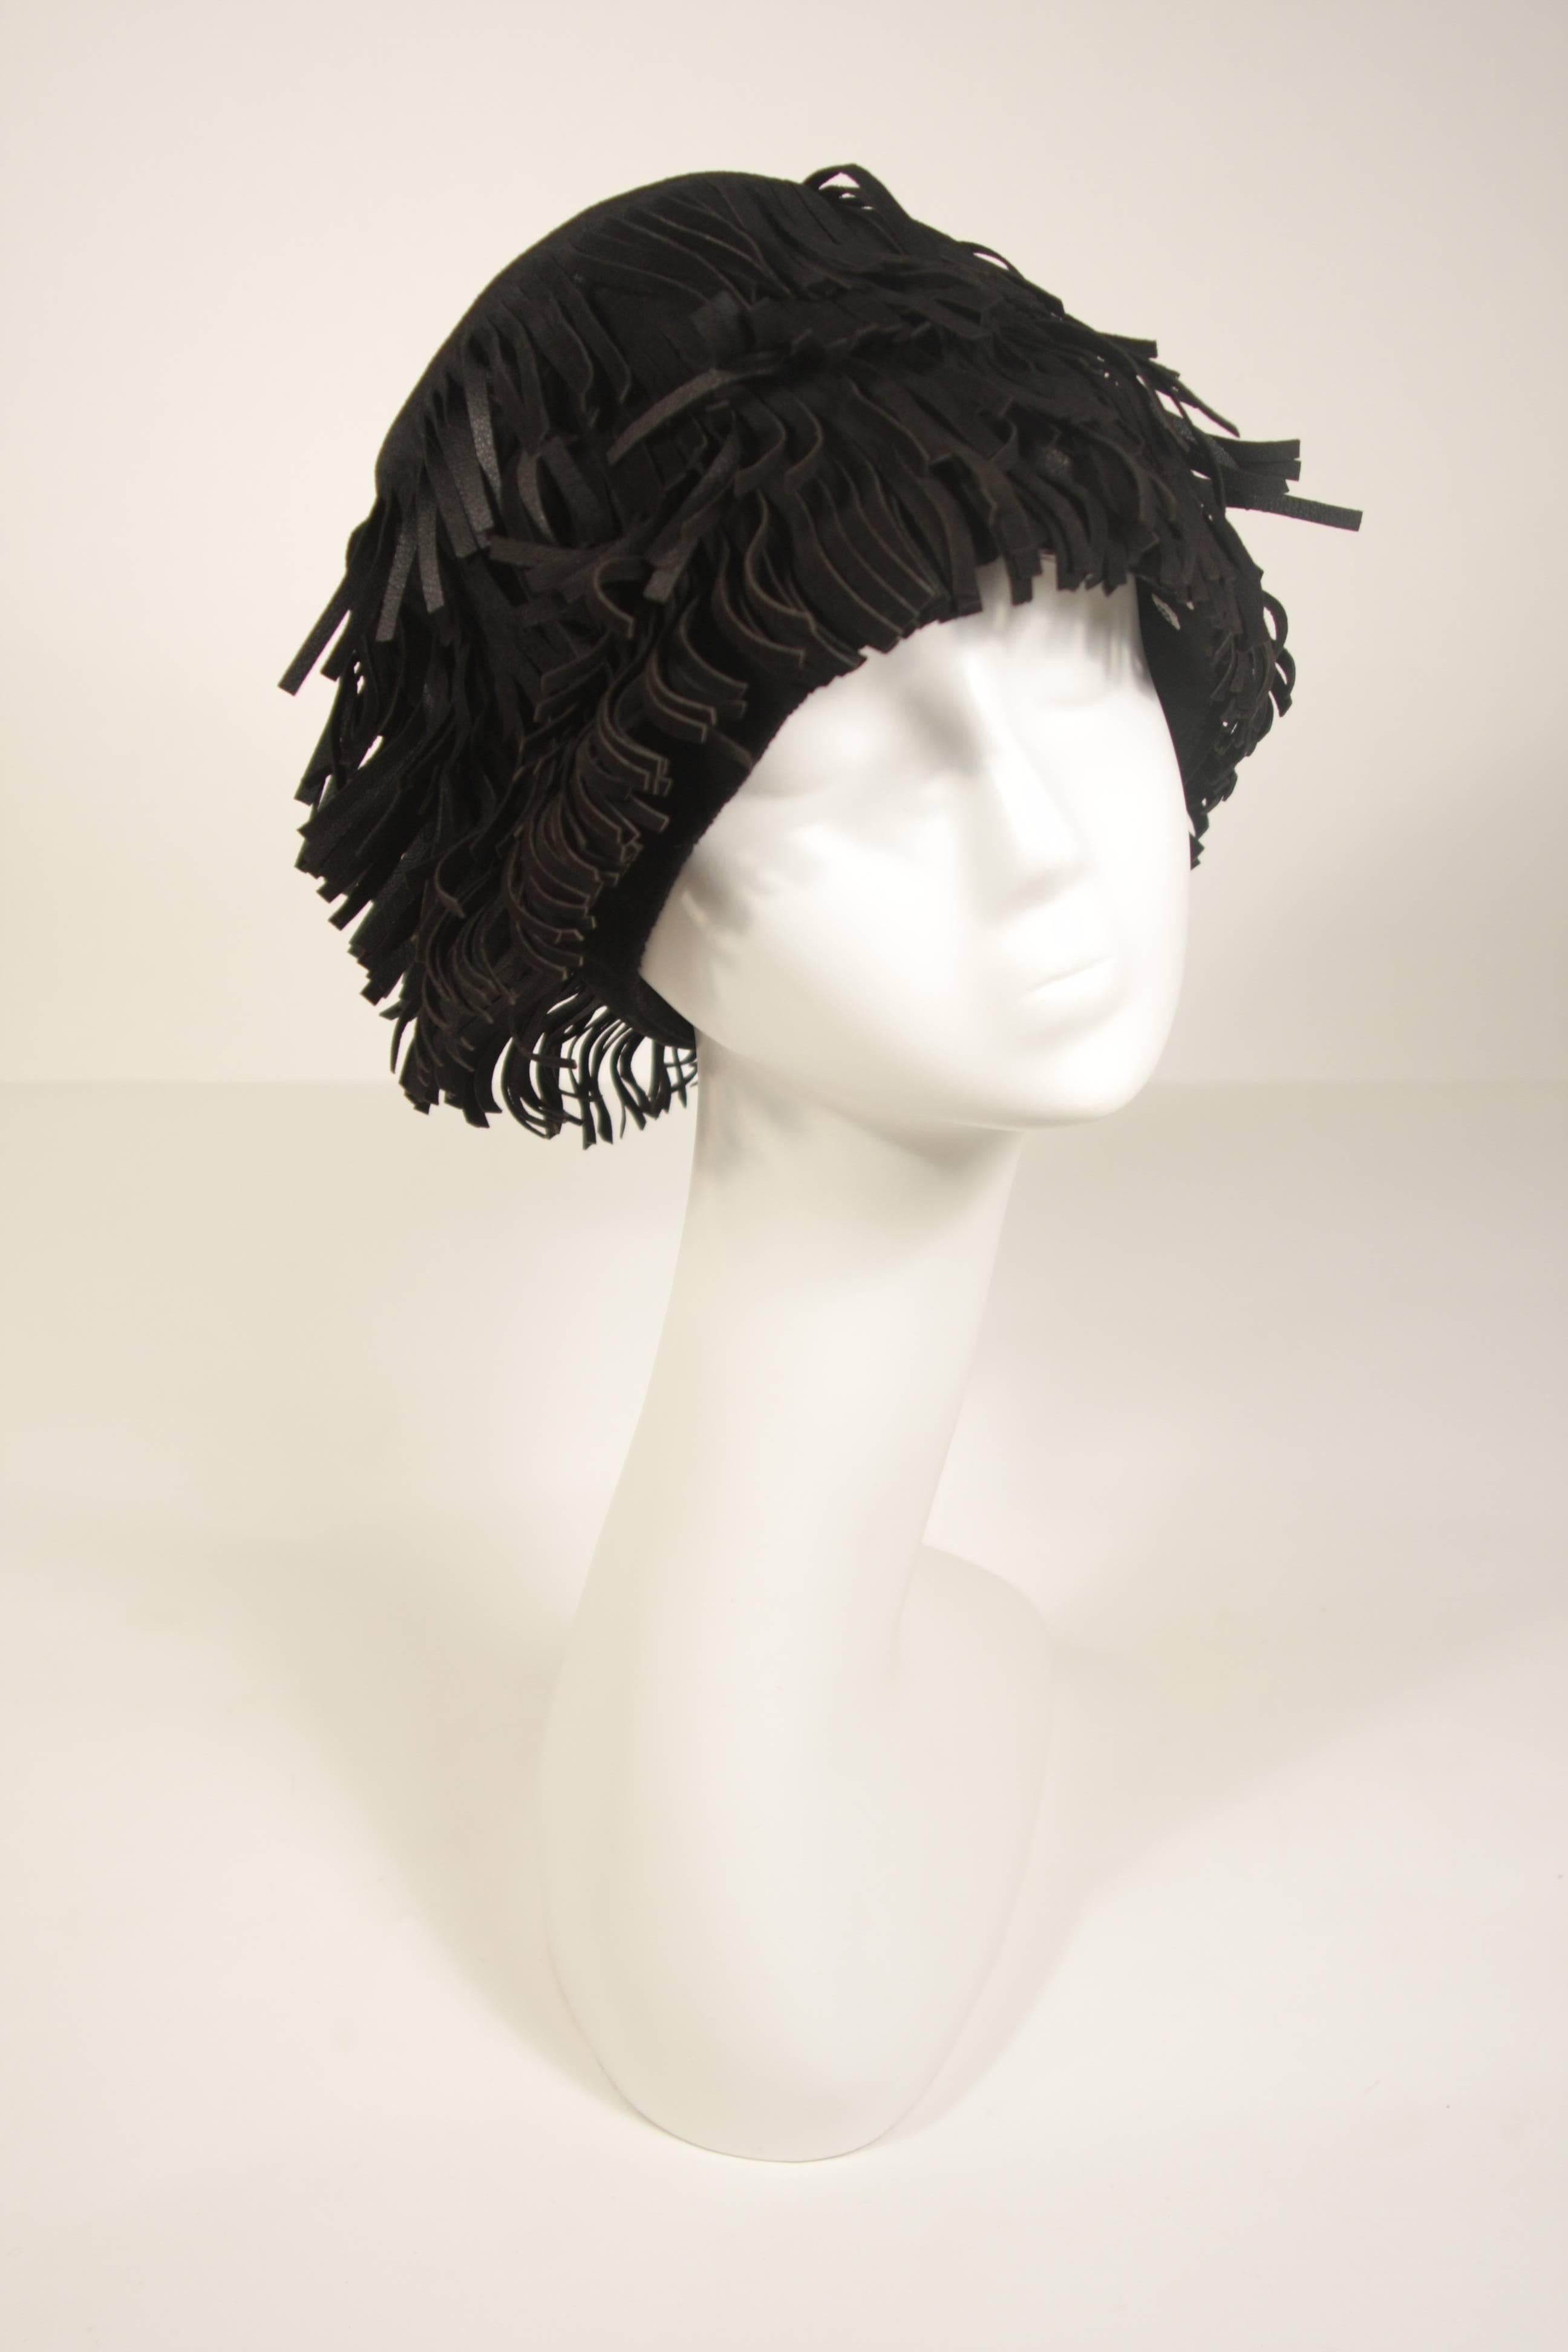 This Yves Saint Laurent Rive Gauche design i hat is composed of a black suede with fringe. In excellent condition.

This YSL hat is from an extensive collection I acquired from the estate of a very wealthy lady who chose to live in Paris for several